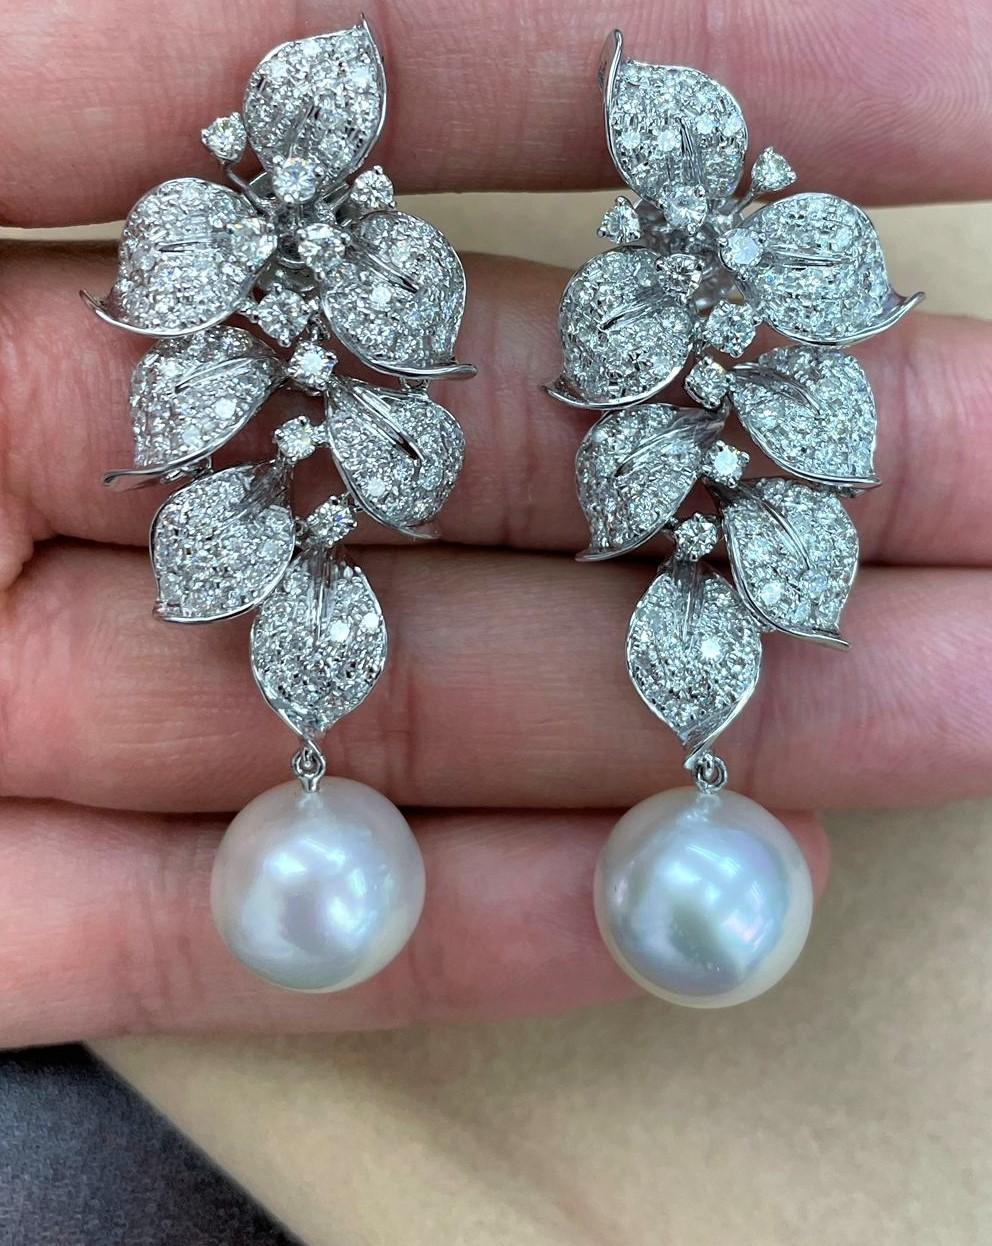 The Following Items we are offering are these Extremely Rare Beautiful 18KT White Gold Fine Large South Sea Pearl Earrings comprised of approx. 4 Carats of Fine Glittering Fancy White Diamonds!! These Extremely Rare Gorgeous White Pearls are Highly